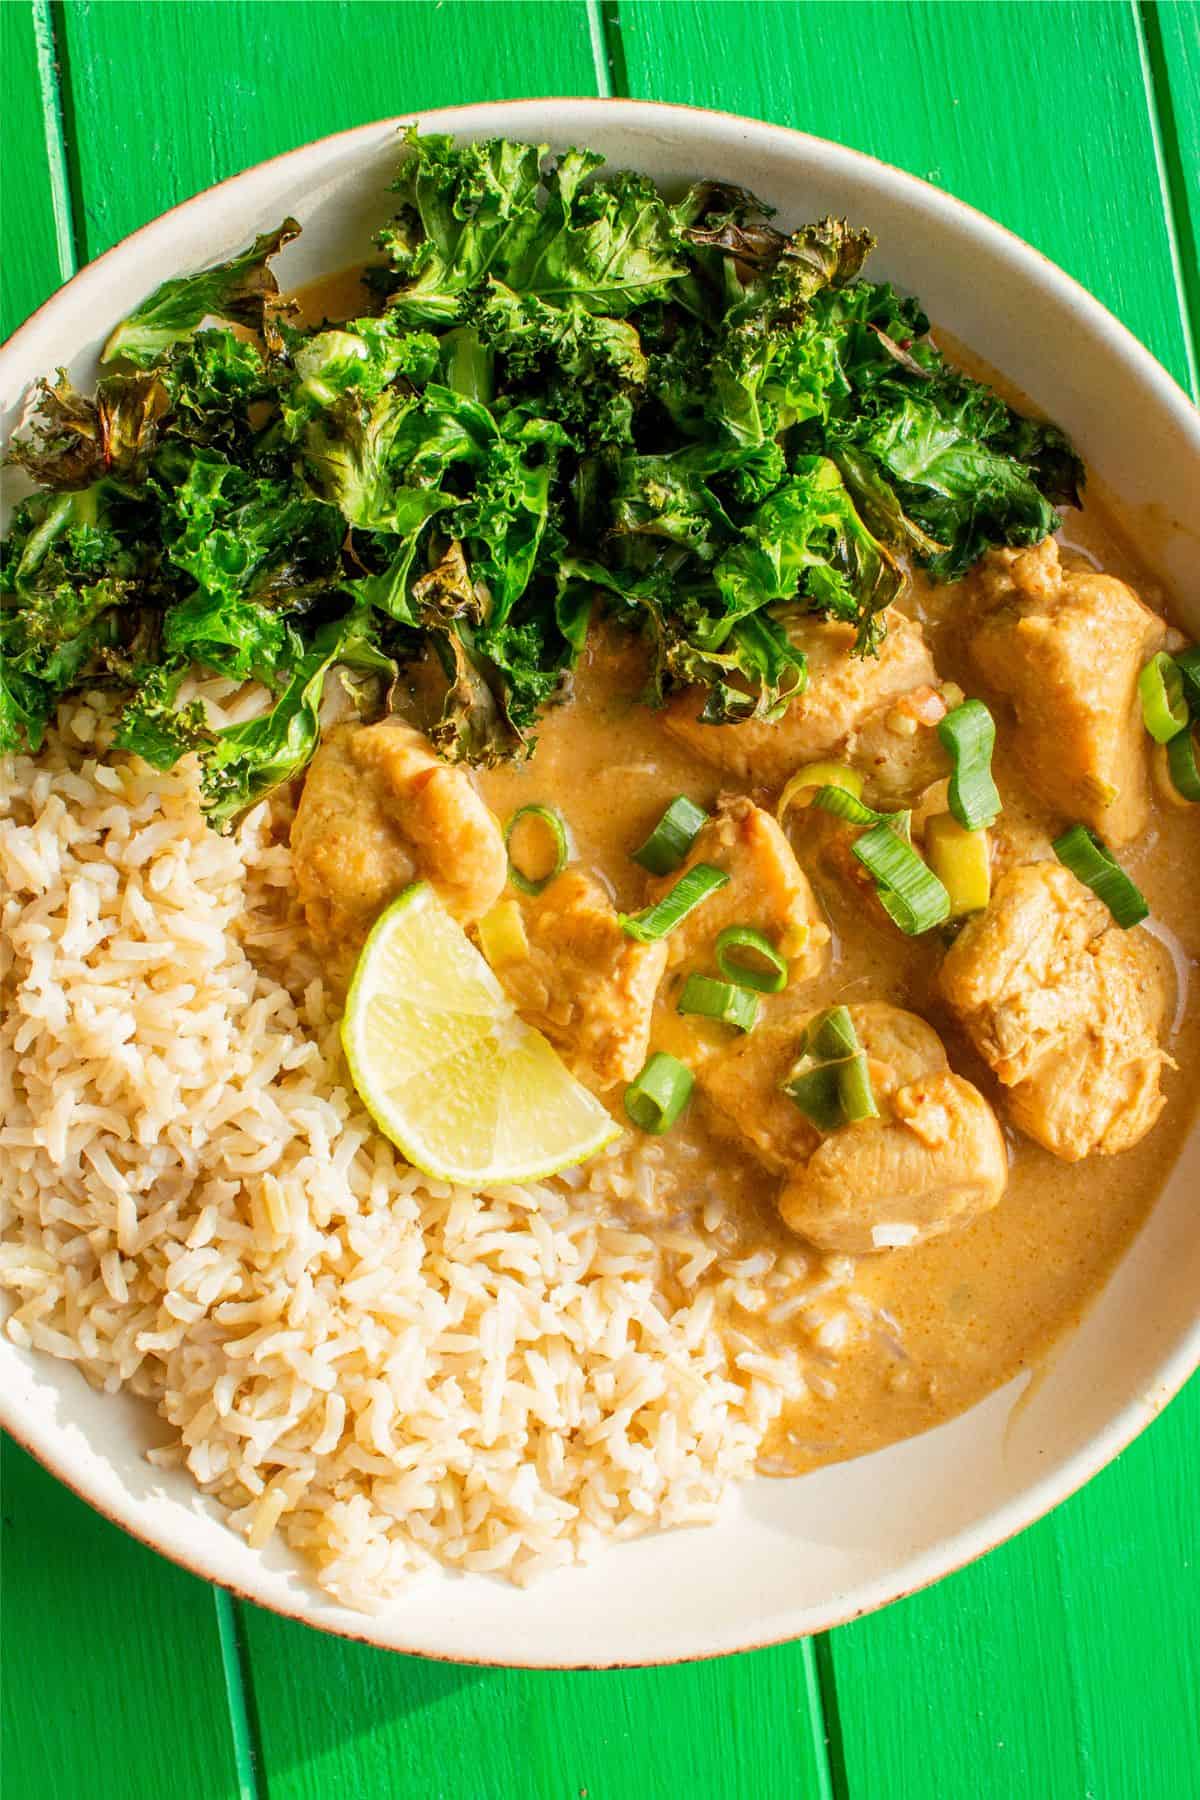 A bowl of peanut butter chicken curry with brown rice, kale and a wedge of lime on a green background.